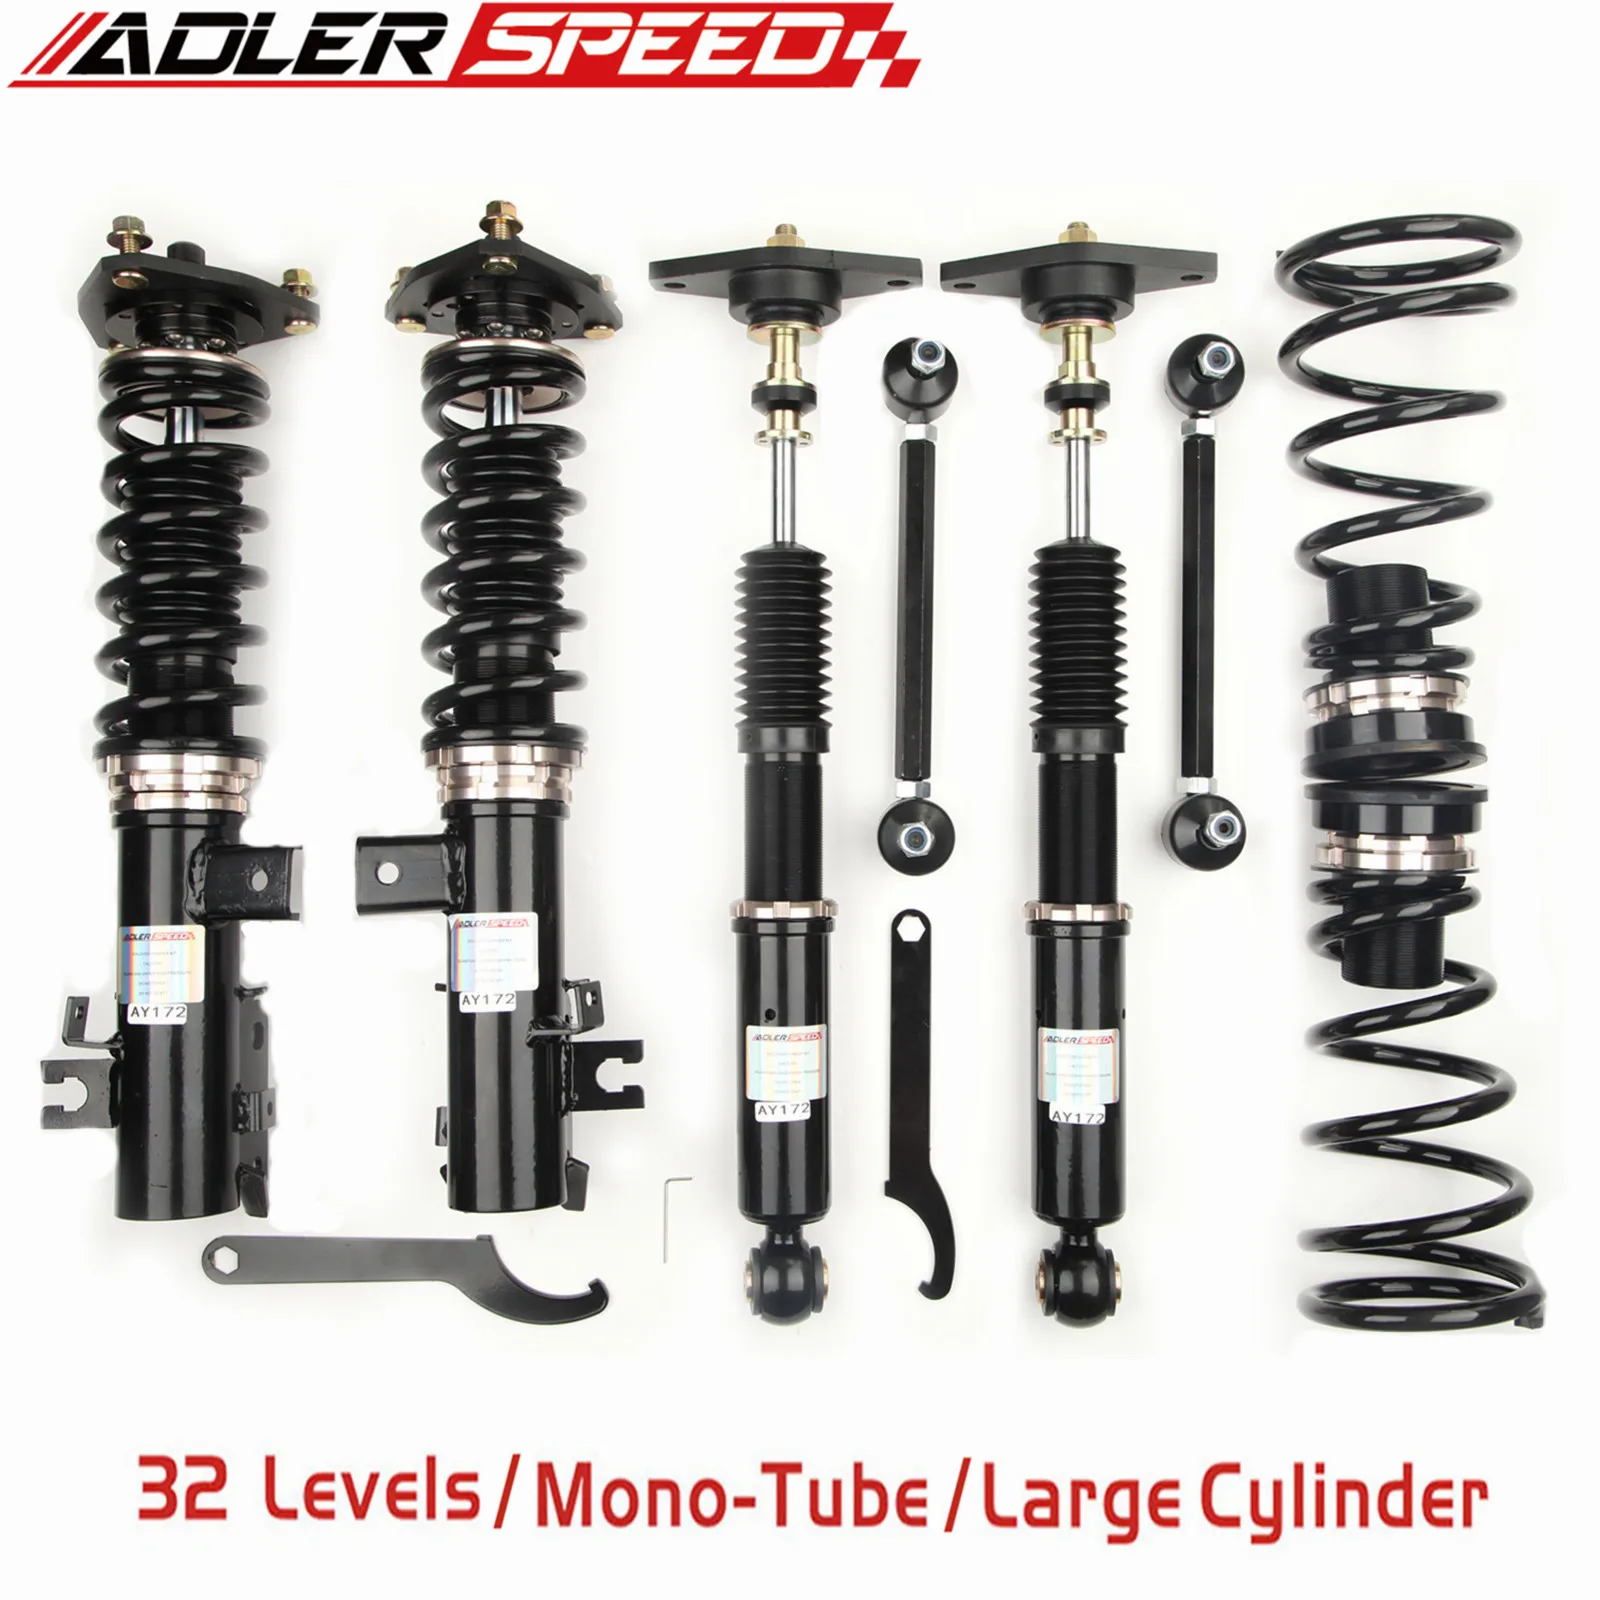 

ADLERSPEED Coilovers Lowering Suspension Kit w/ 32-Way Damping For MAZDA 3 14-18